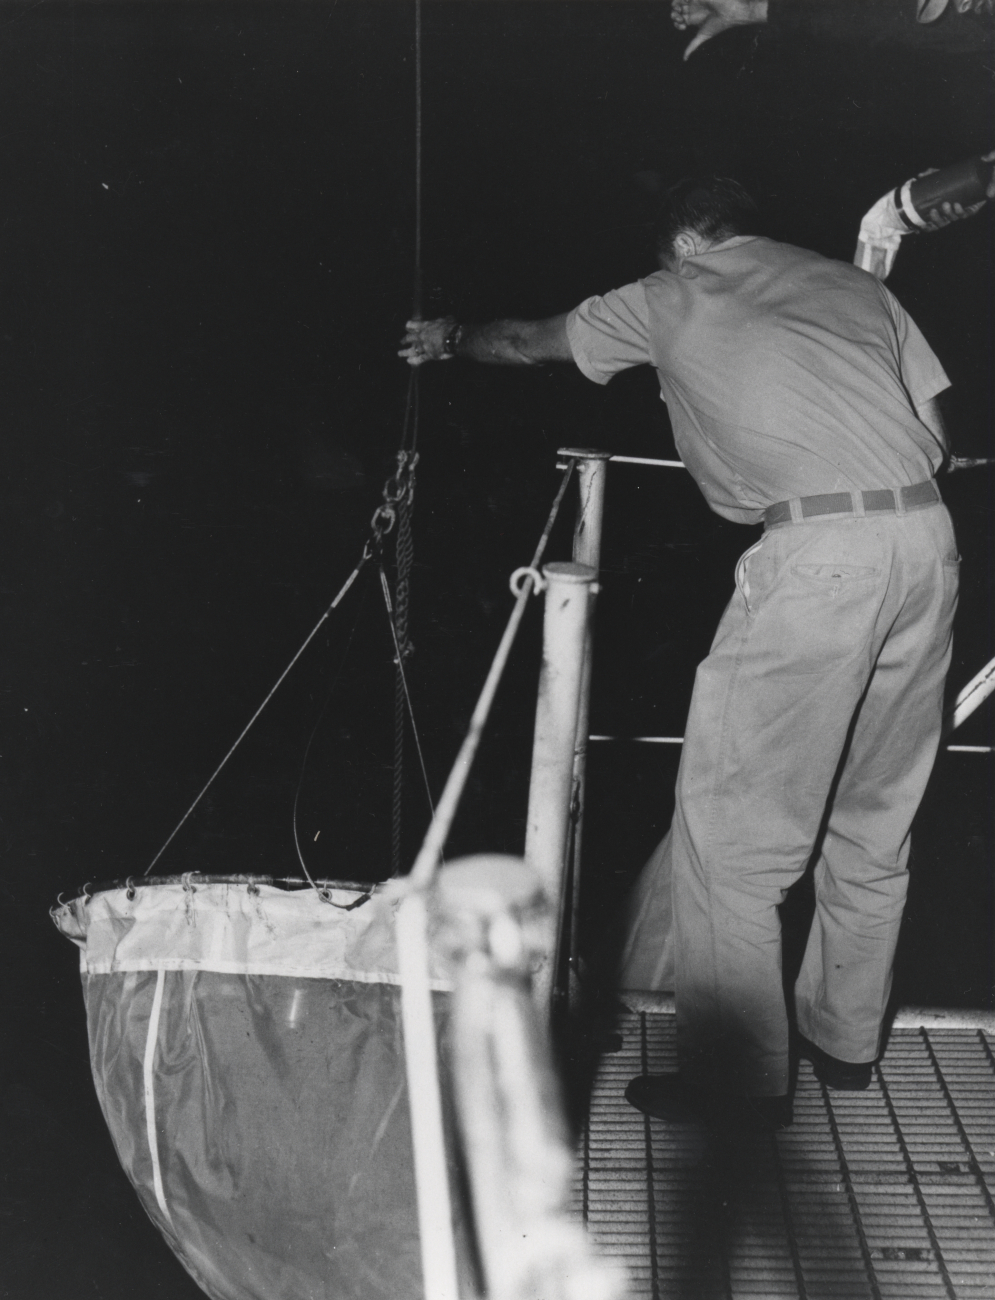 Plankton net recovery on board USC&GS; OCEANOGRAPHER during its 1967global expedition